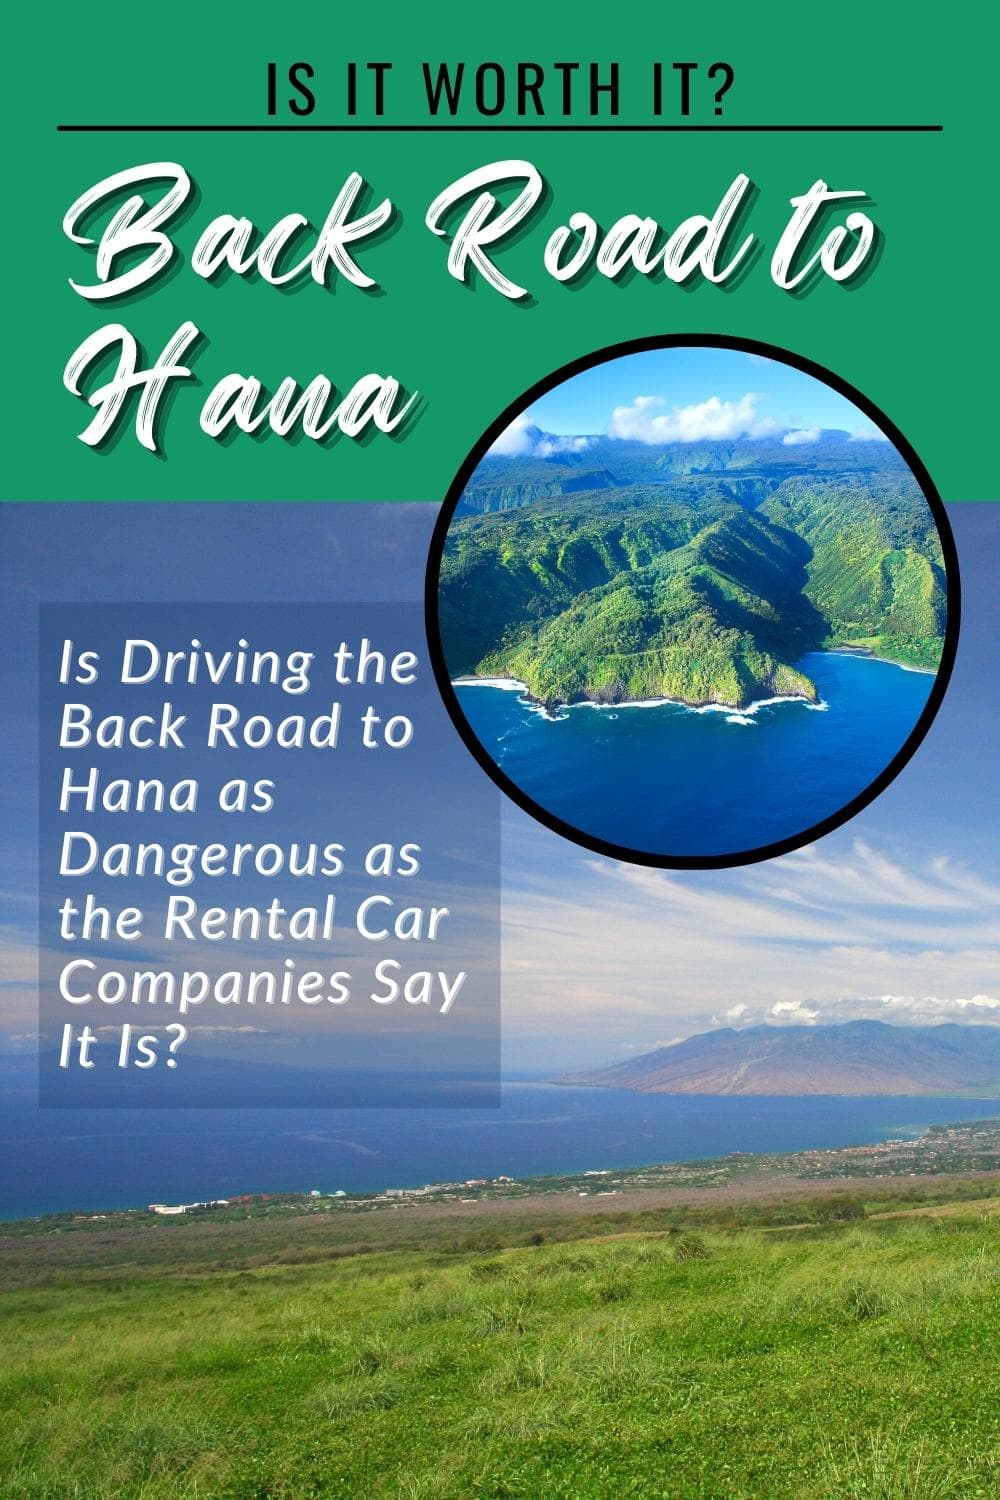 The Back Road to Hana: How Bad Is It, Really? Is It Worth It?